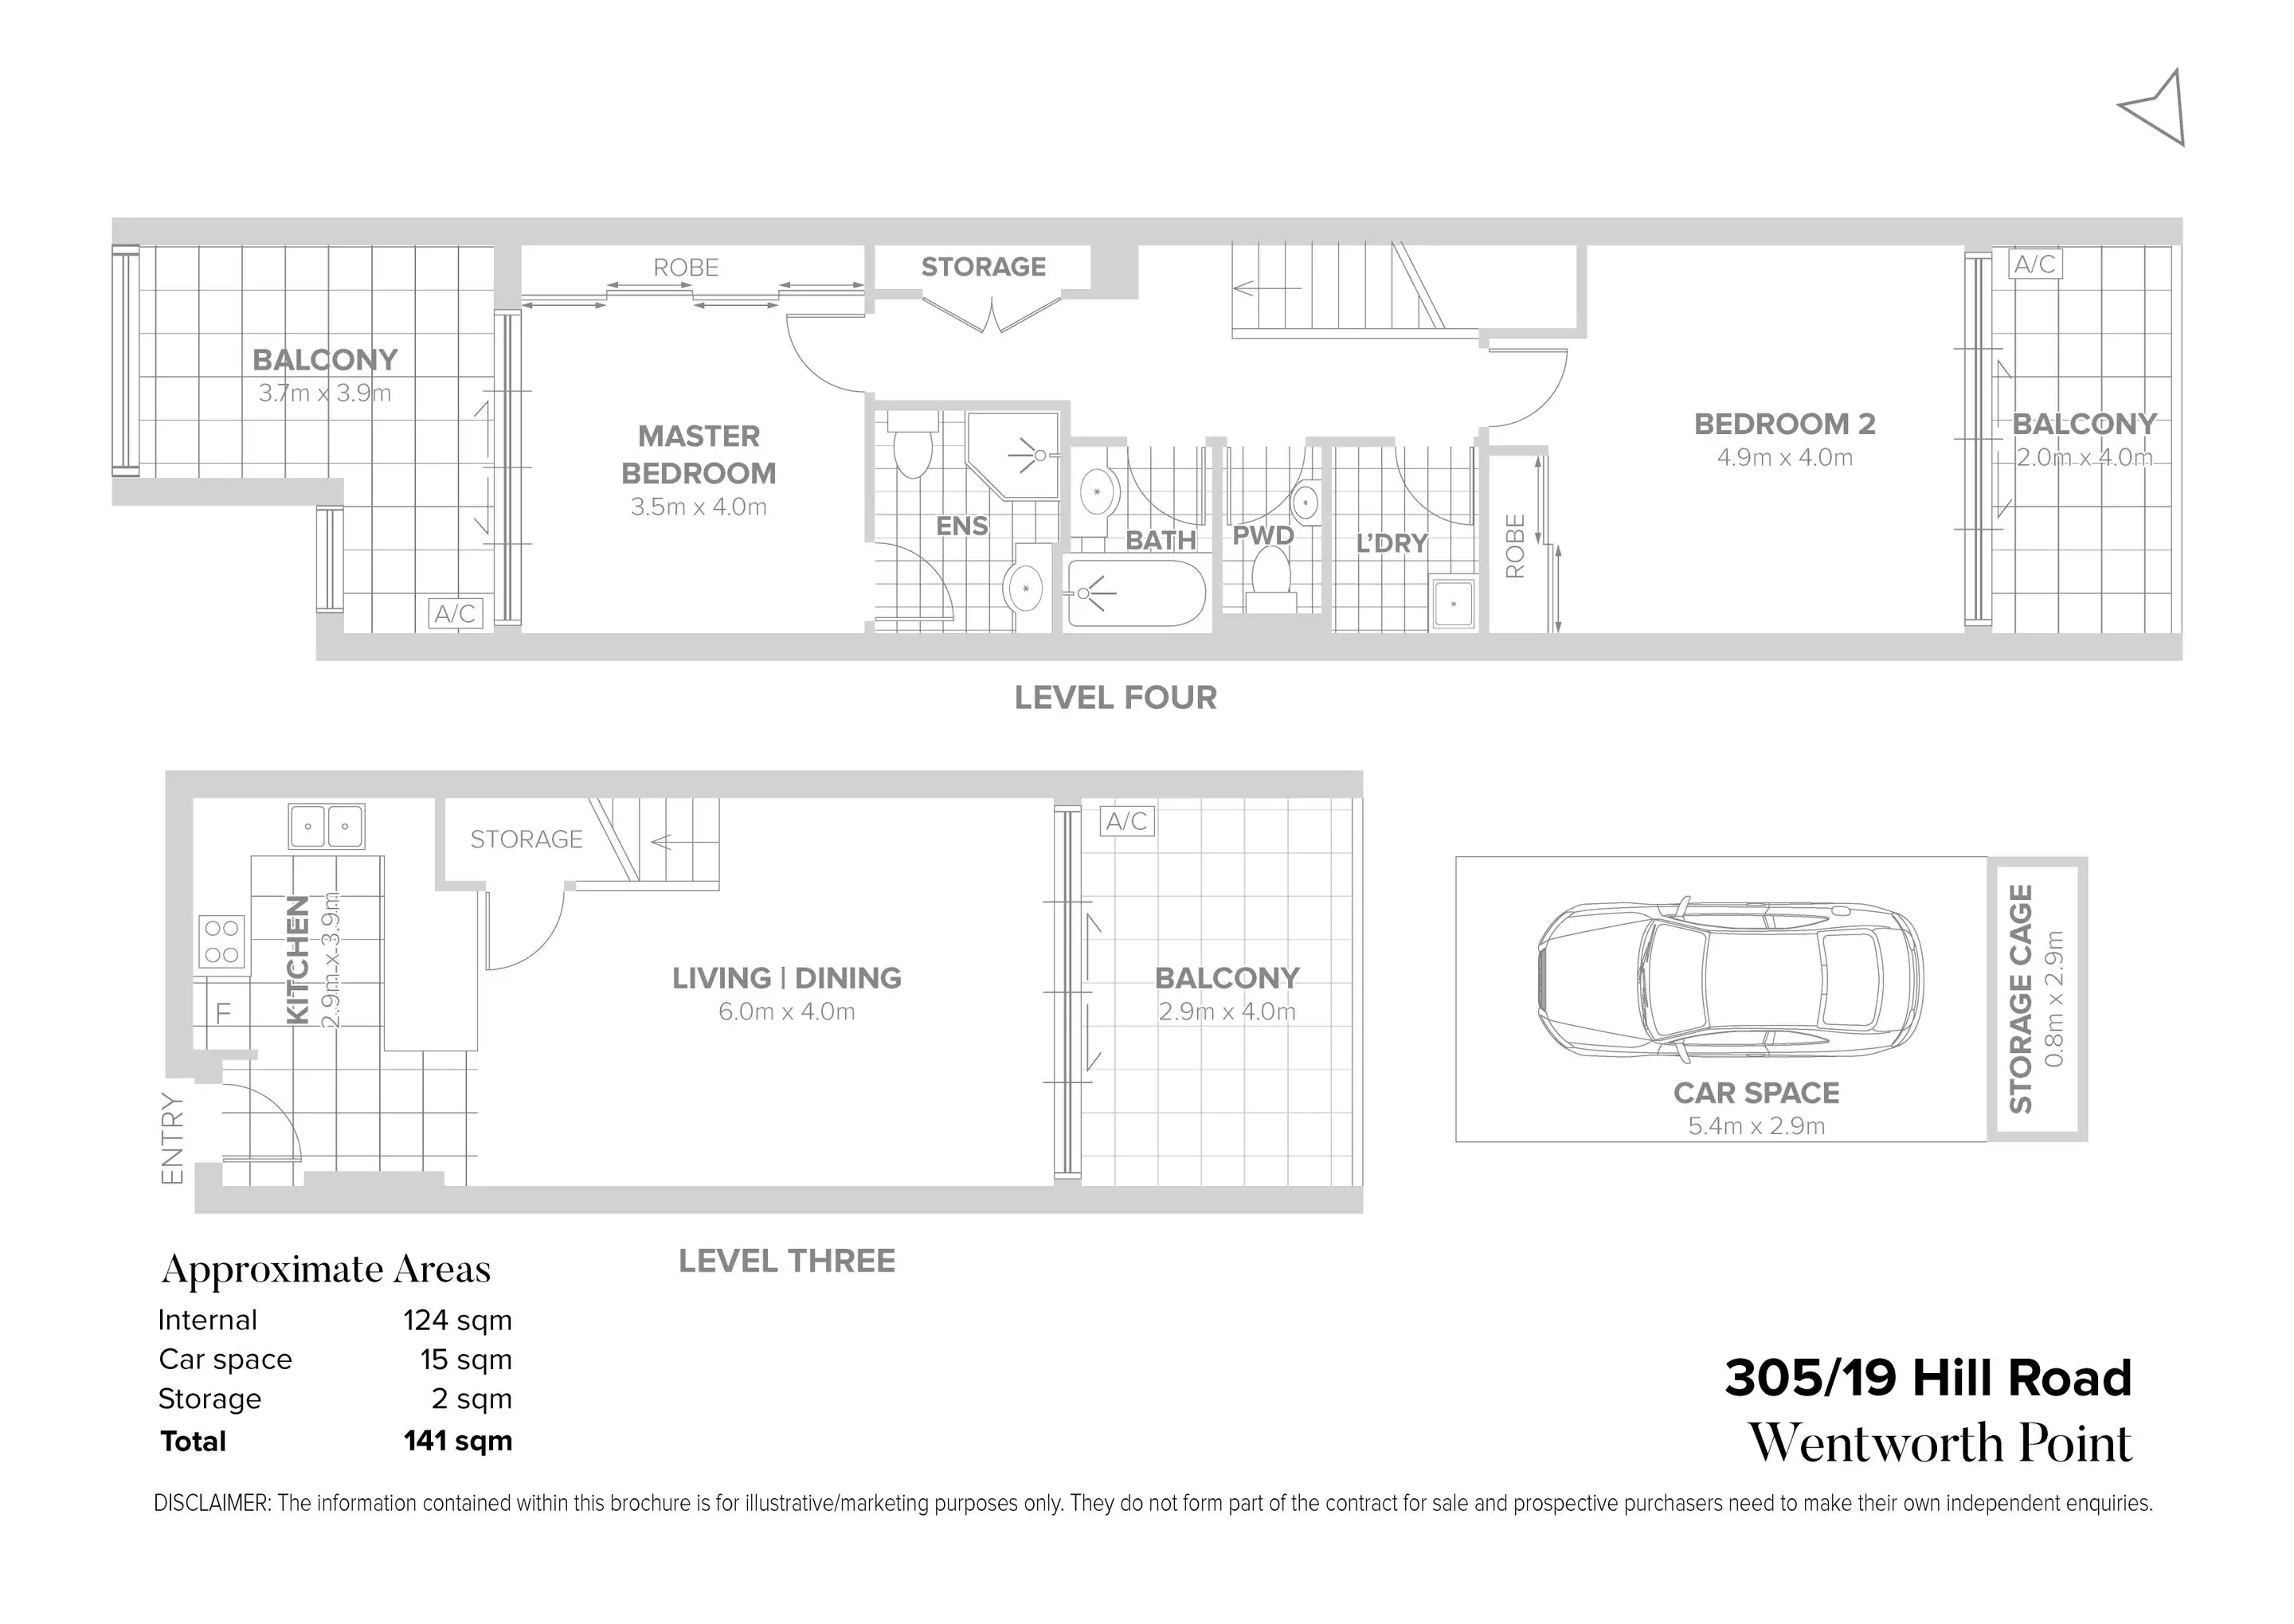 305/19 Hill Road, Wentworth Point Sold by Chidiac Realty - floorplan